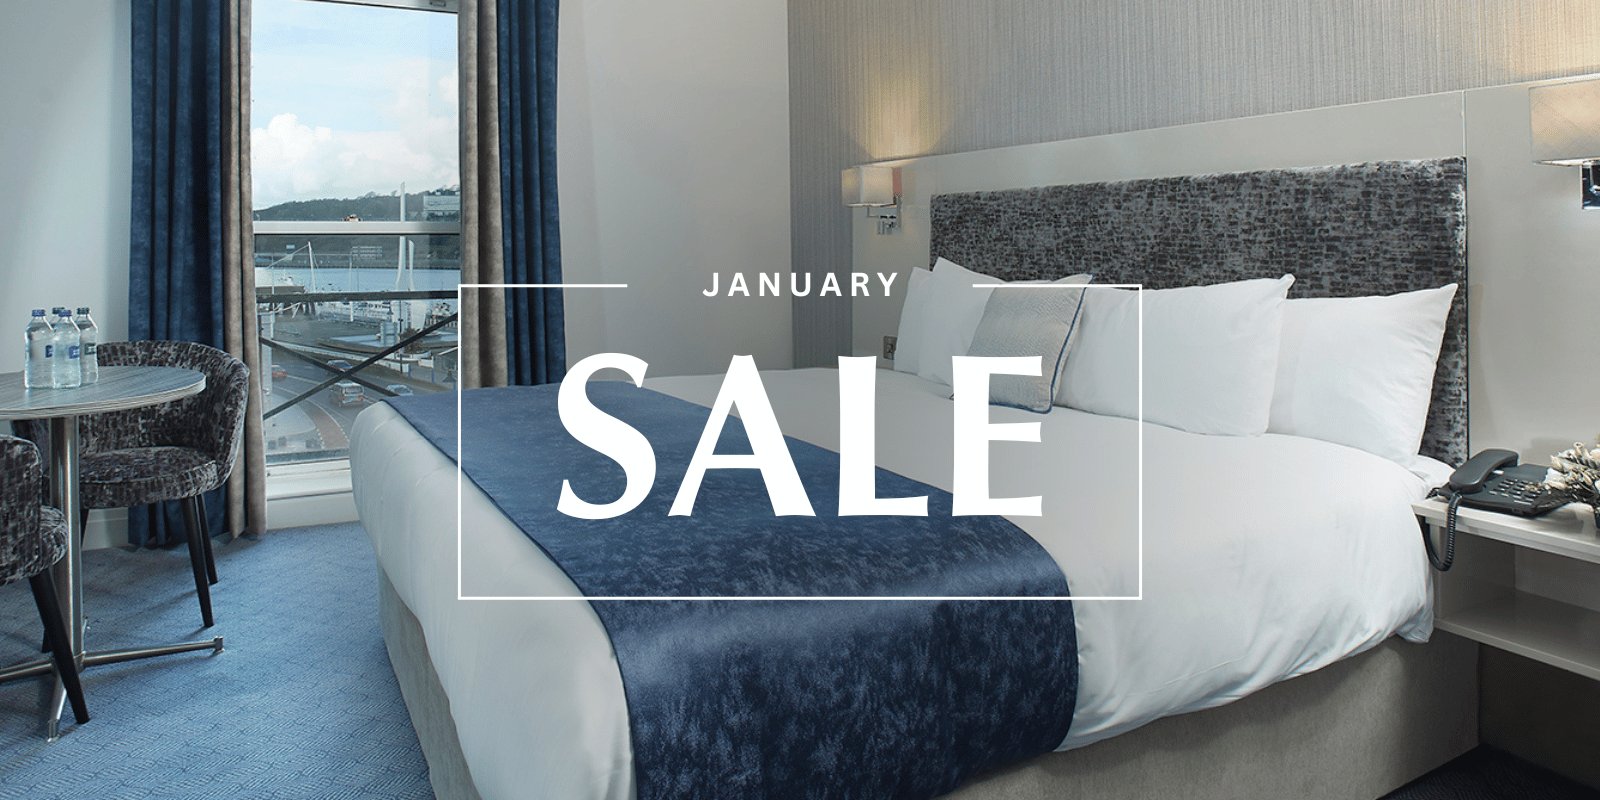 Teaser january sale loyalty page banner image x www.towerhotelwaterford.com_v4